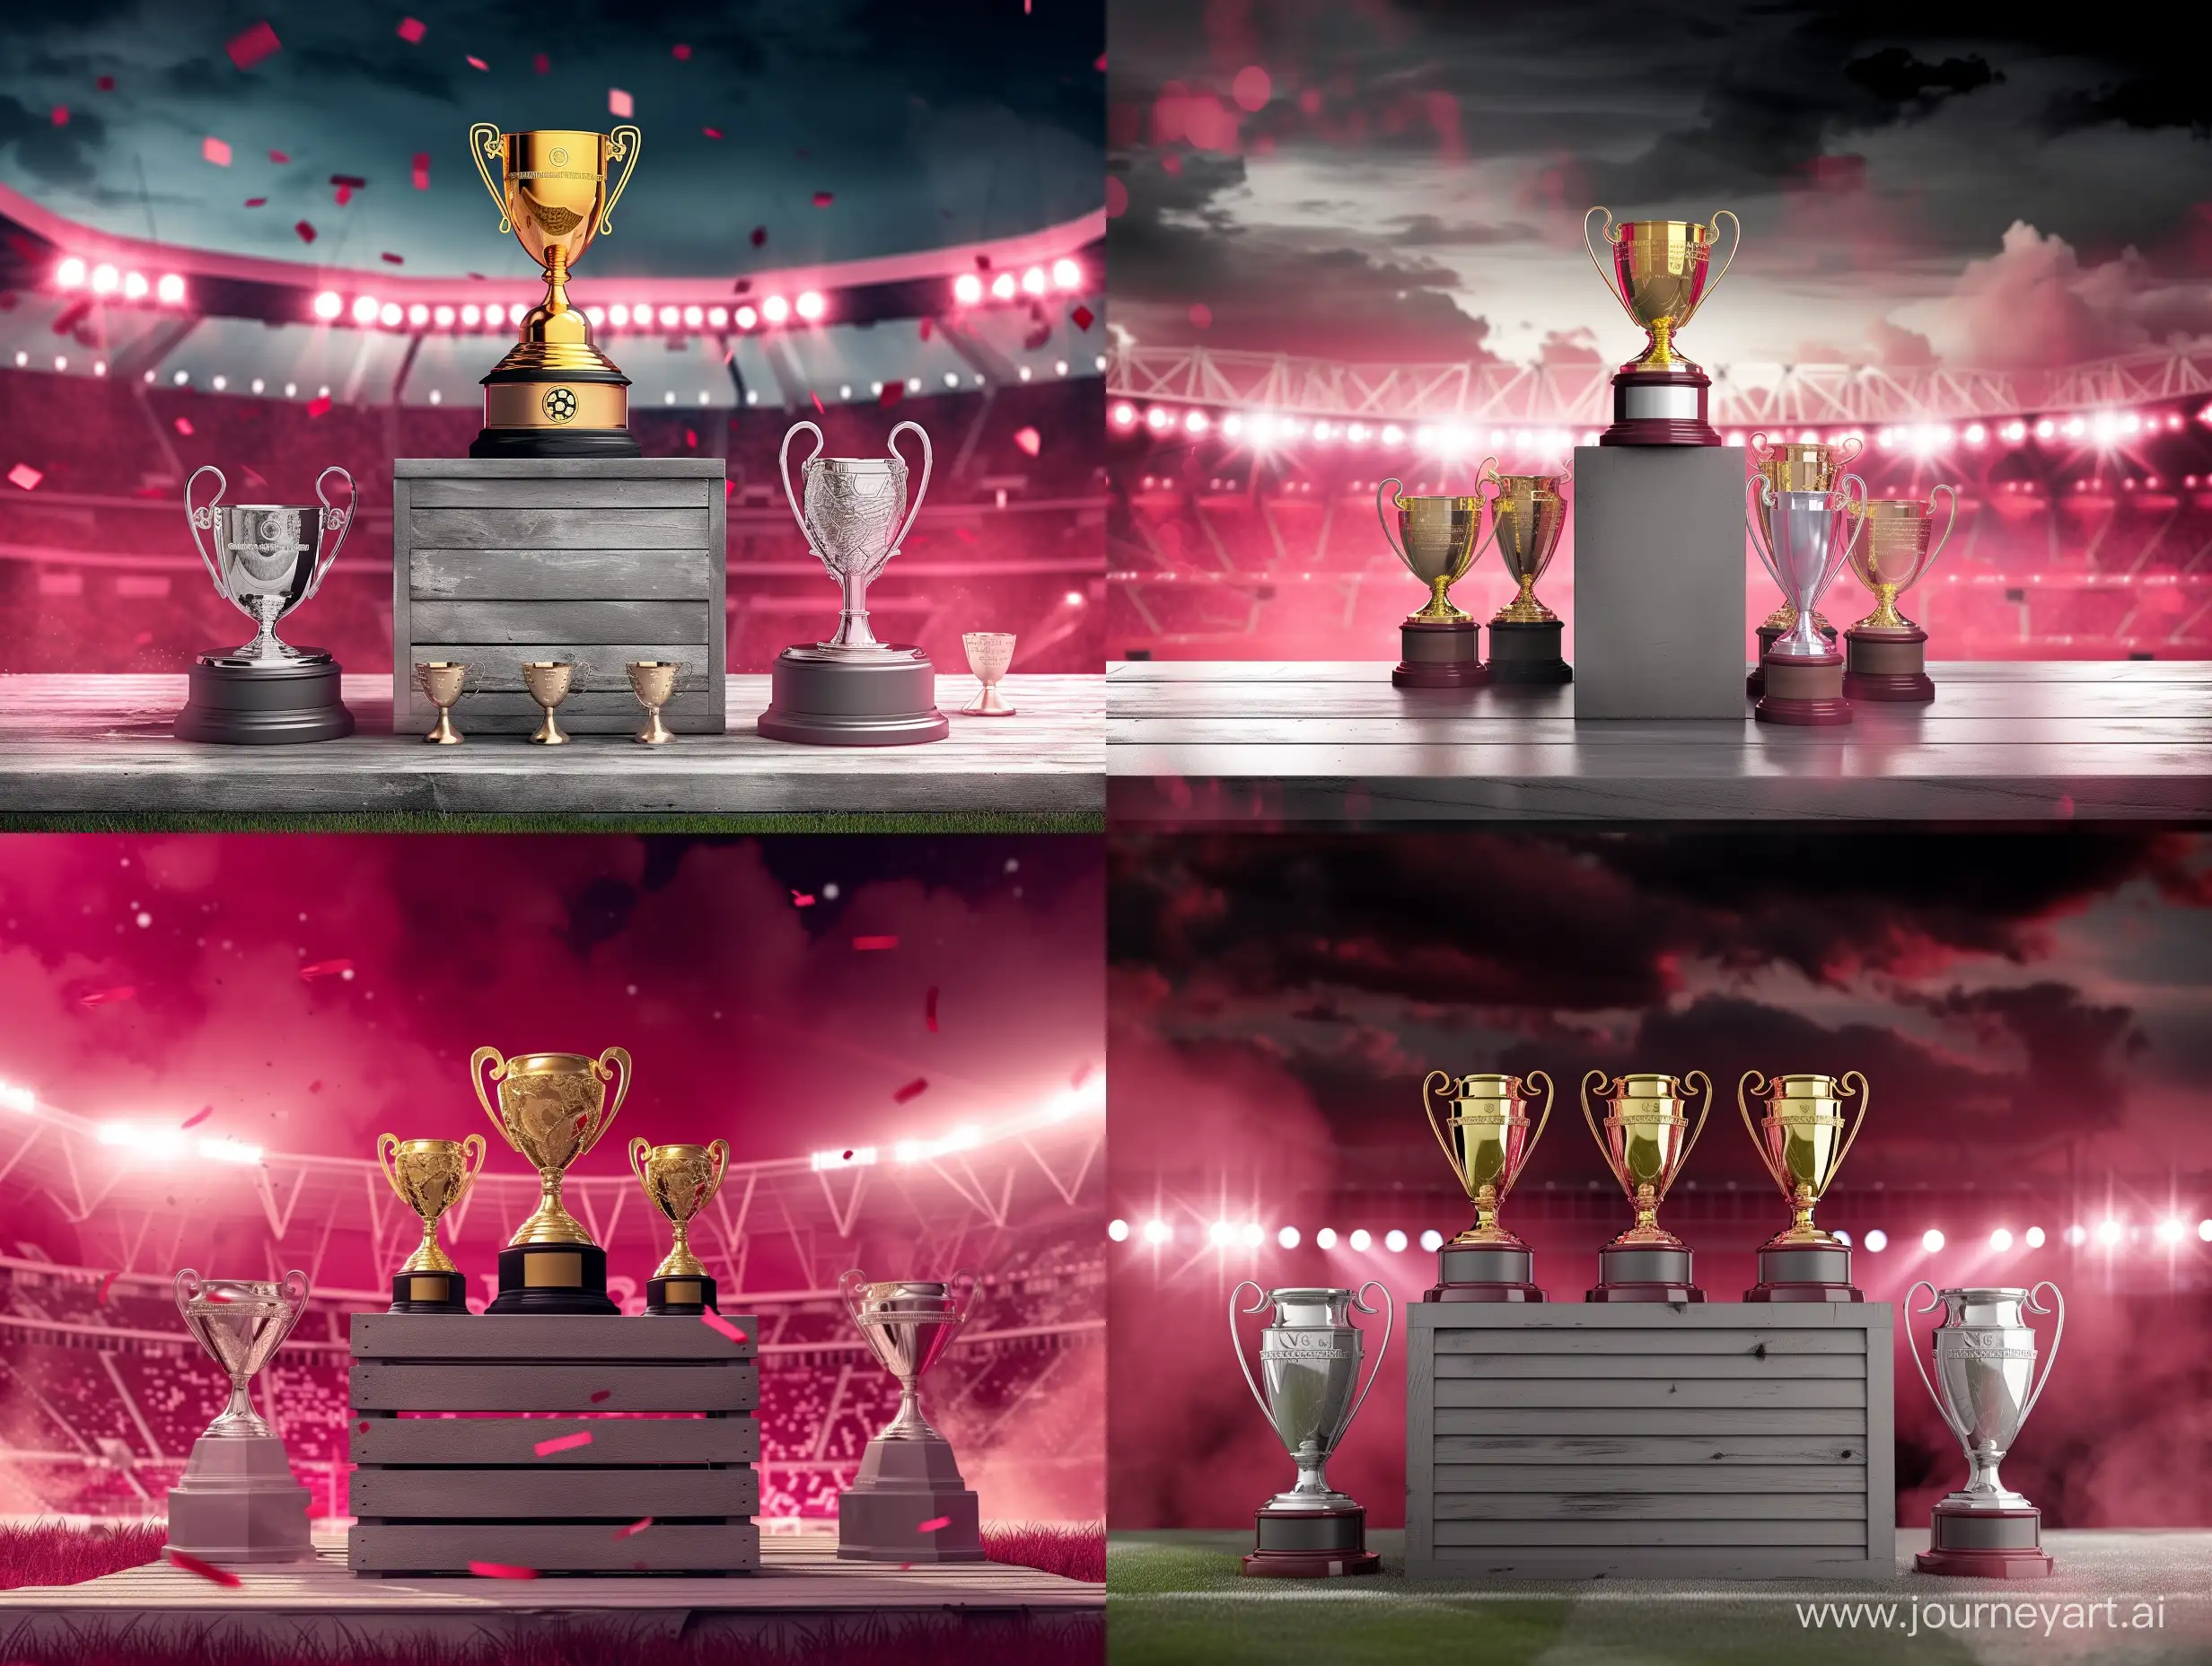 Dramatic-Night-Lights-Illuminate-Soccer-Stadium-Podium-with-Gold-and-Silver-Trophies